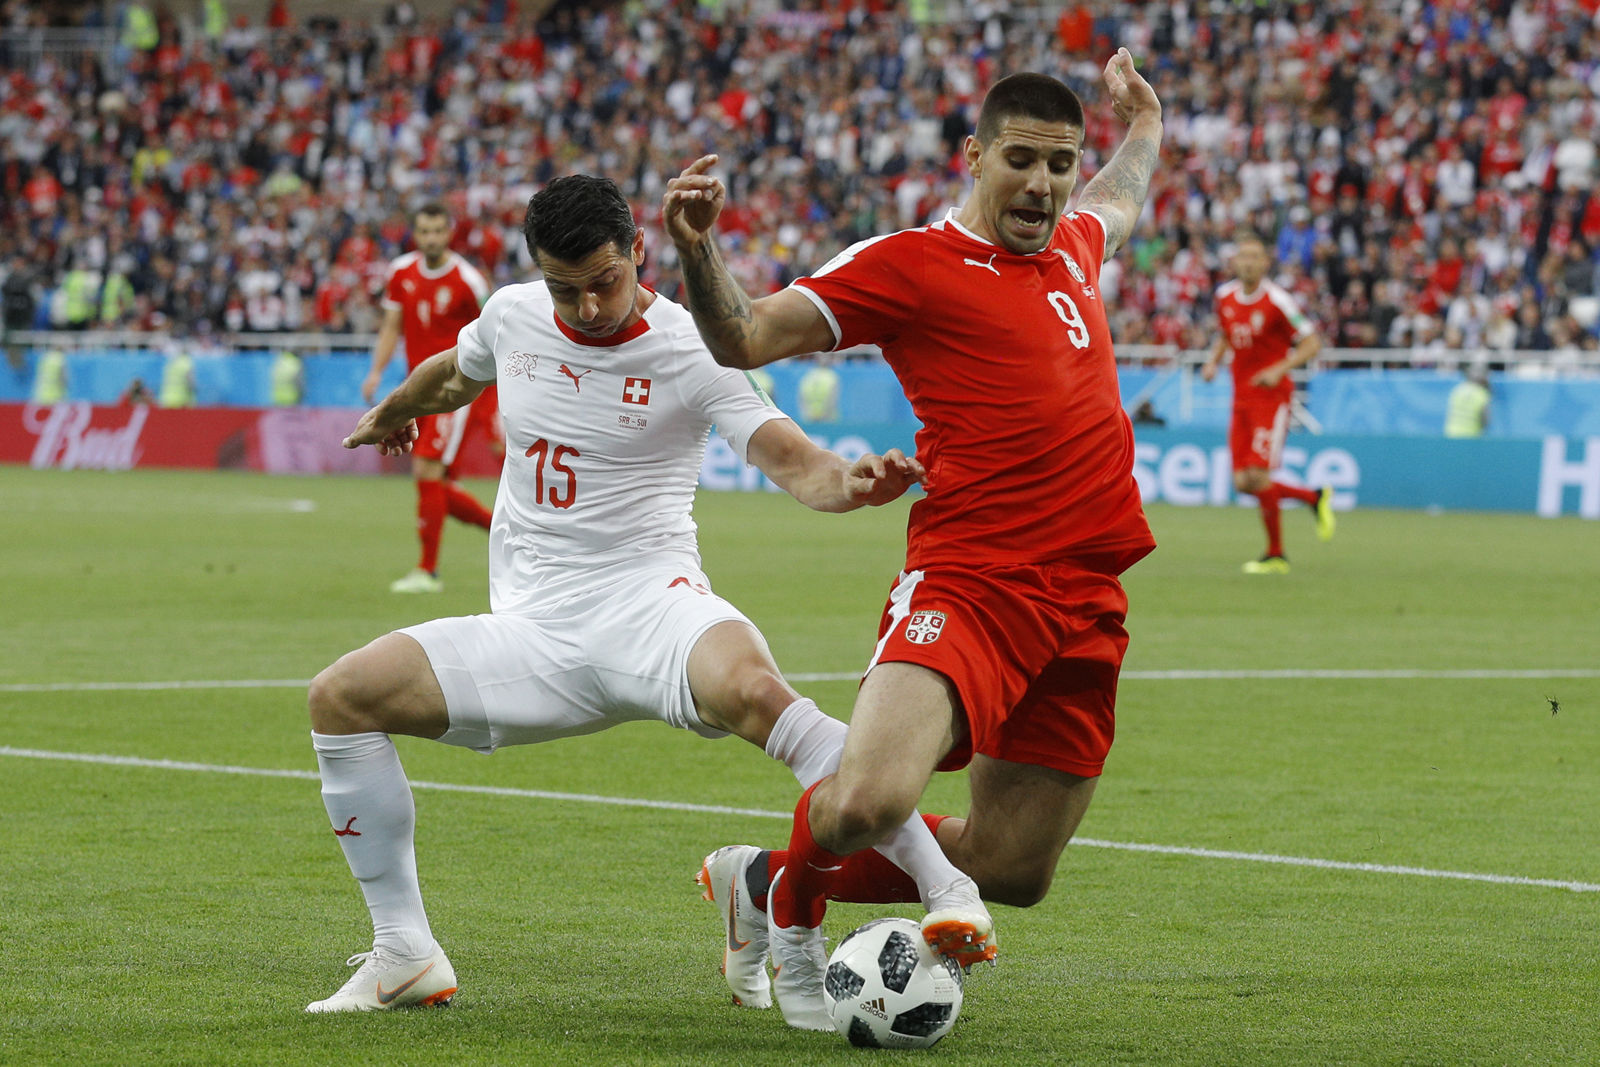 Switzerland's Blerim Dzemaili, left, and Serbia's Aleksandar Mitrovic battle for the ball during the group E match between Switzerland and Serbia at the 2018 soccer World Cup in the Kaliningrad Stadium in Kaliningrad, Russia, Friday, June 22, 2018. (AP Photo/Victor Caivano)